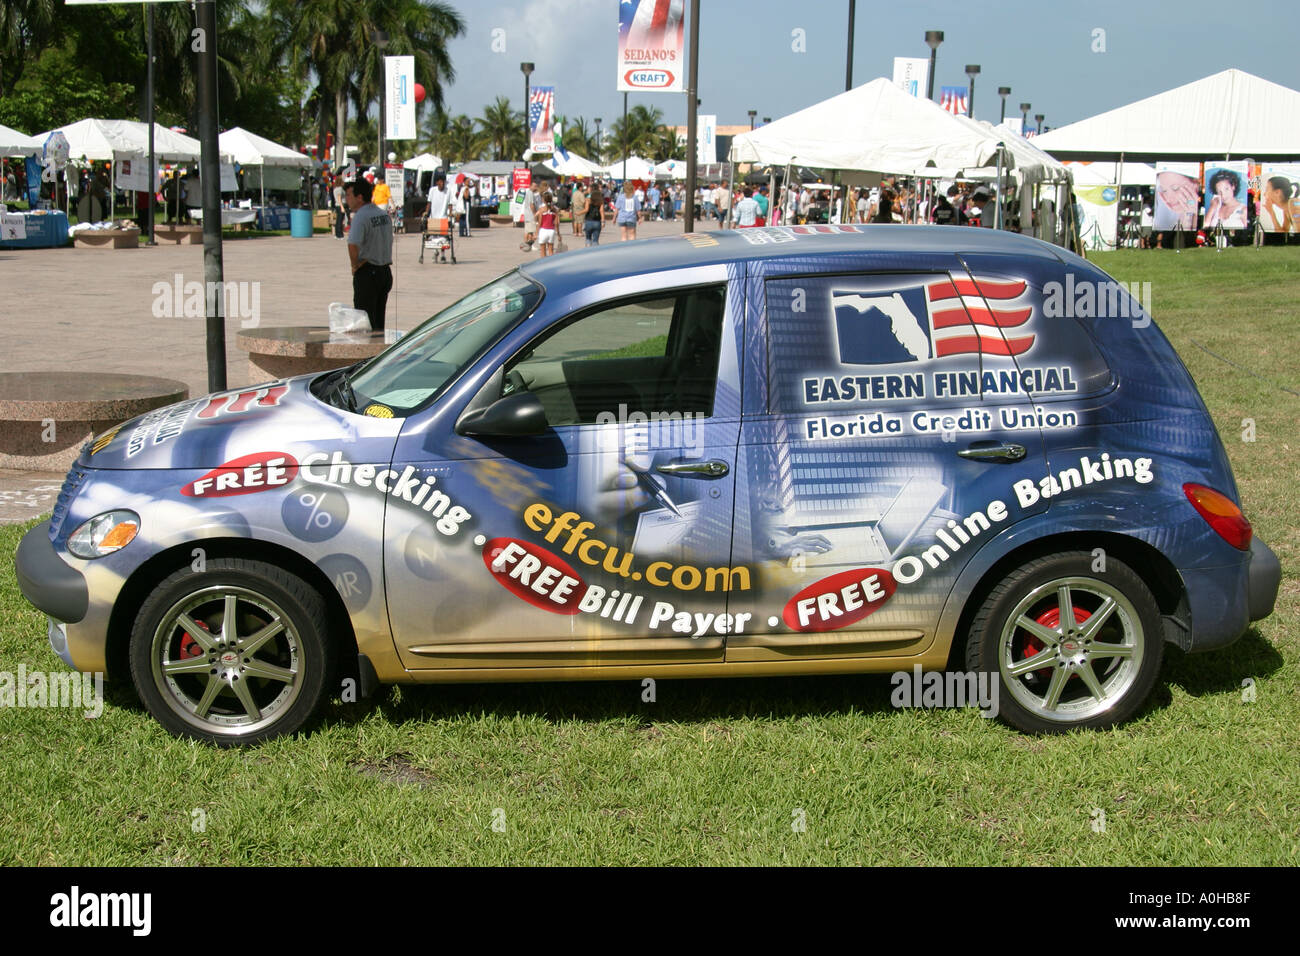 Miami Florida,Bayfront Park,4th of July Celebration,Fourth,vehicle,advertise,U.S.A.,United States America,North American Americans,visitors travel tra Stock Photo